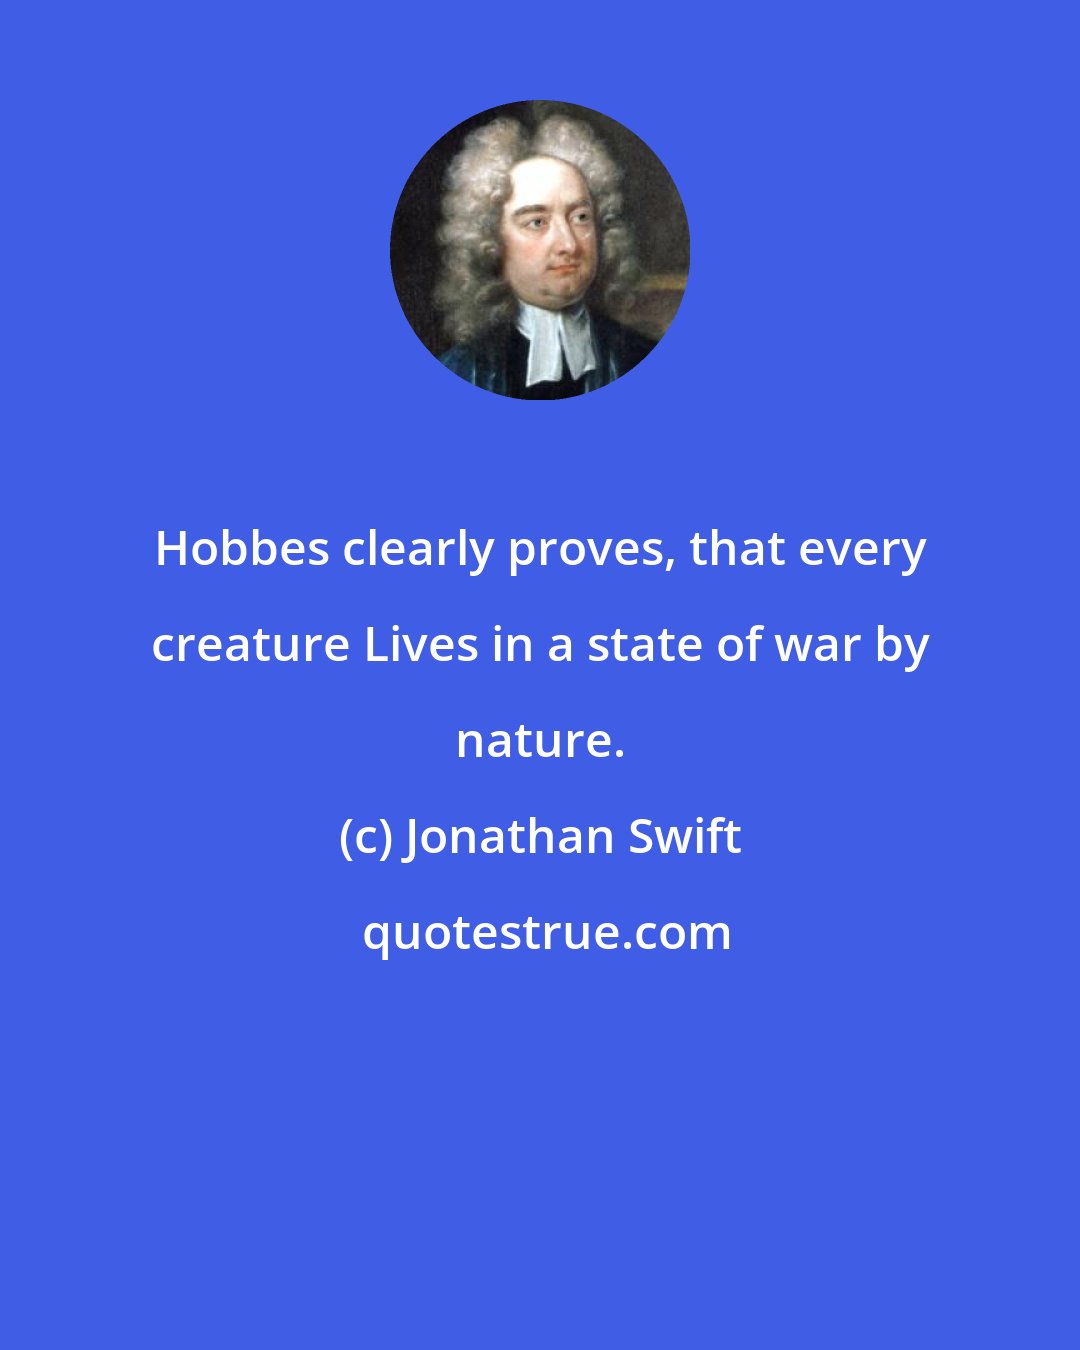 Jonathan Swift: Hobbes clearly proves, that every creature Lives in a state of war by nature.